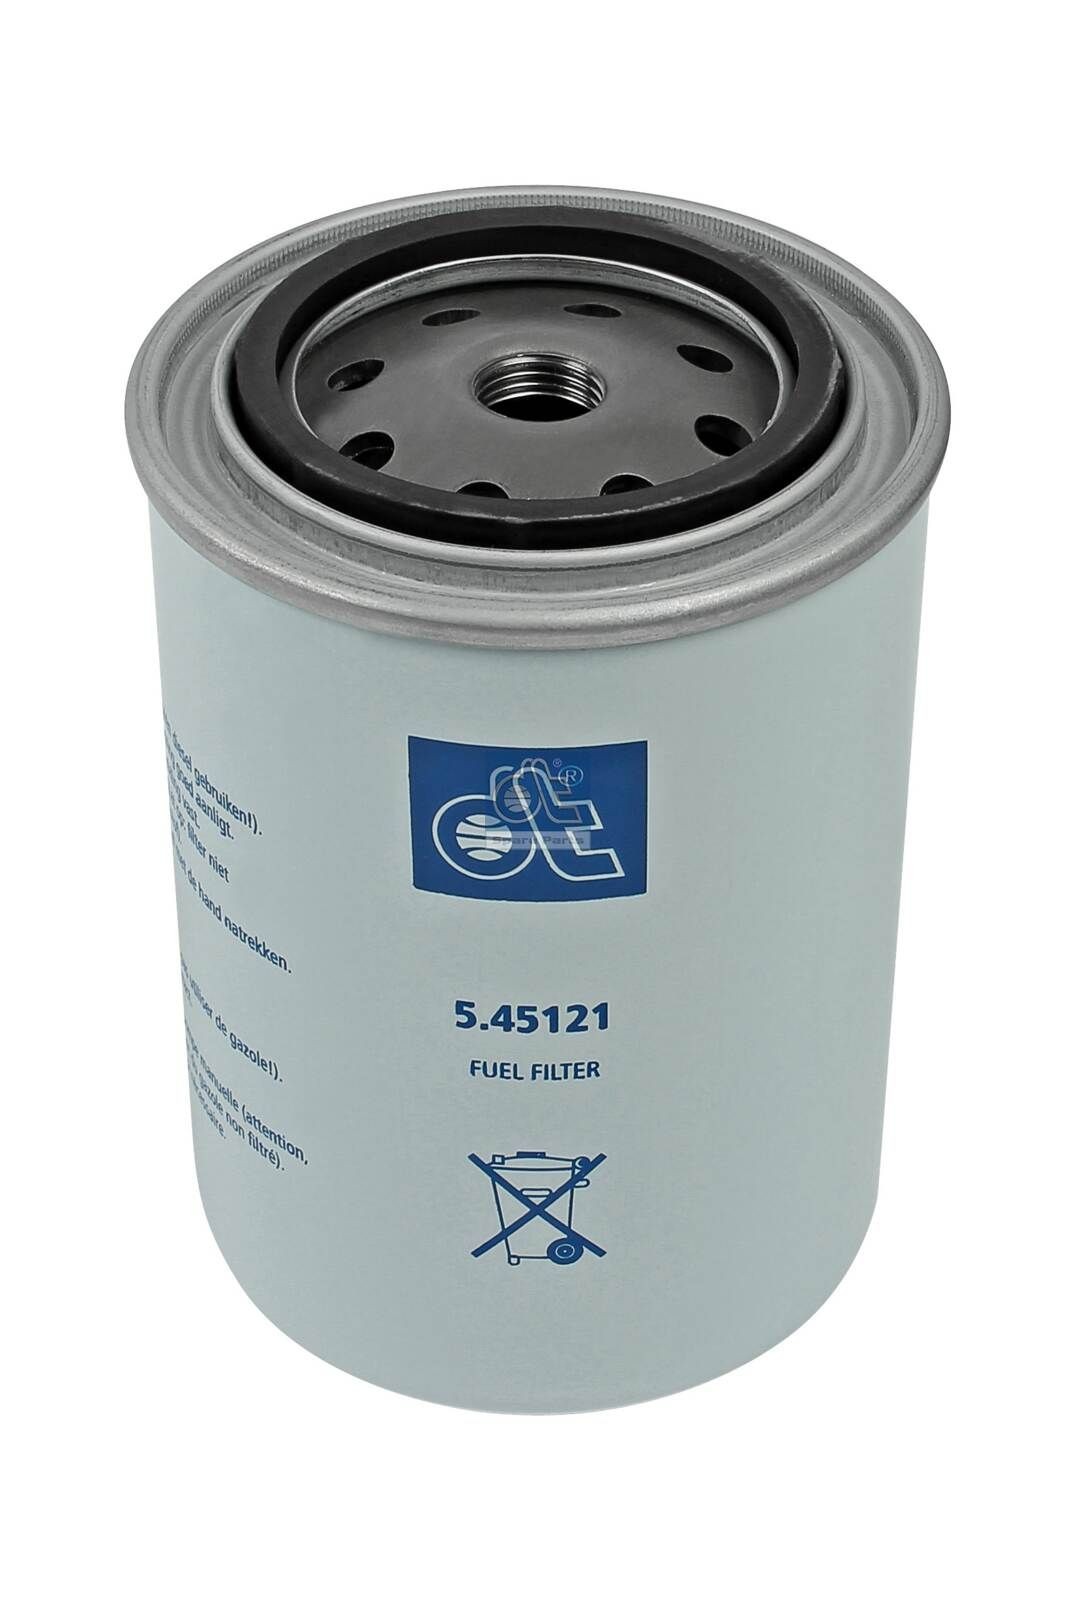 WDK 940/5 DT Spare Parts 5.45121 Fuel filter 928 301